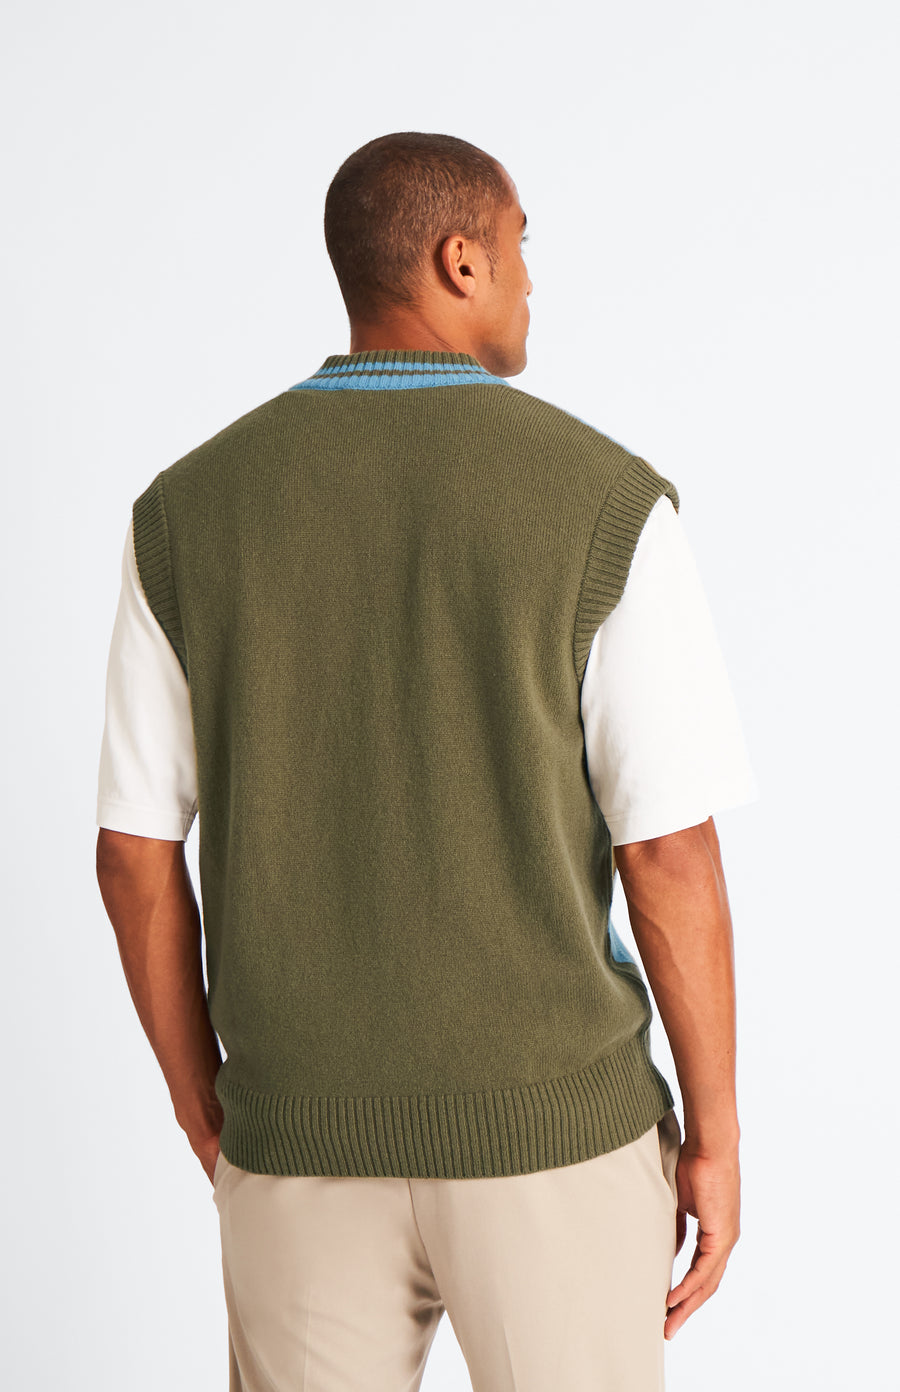 Pringle Lambswool Argyle V Neck Vest in Royal Blue & Mineral Green rear view